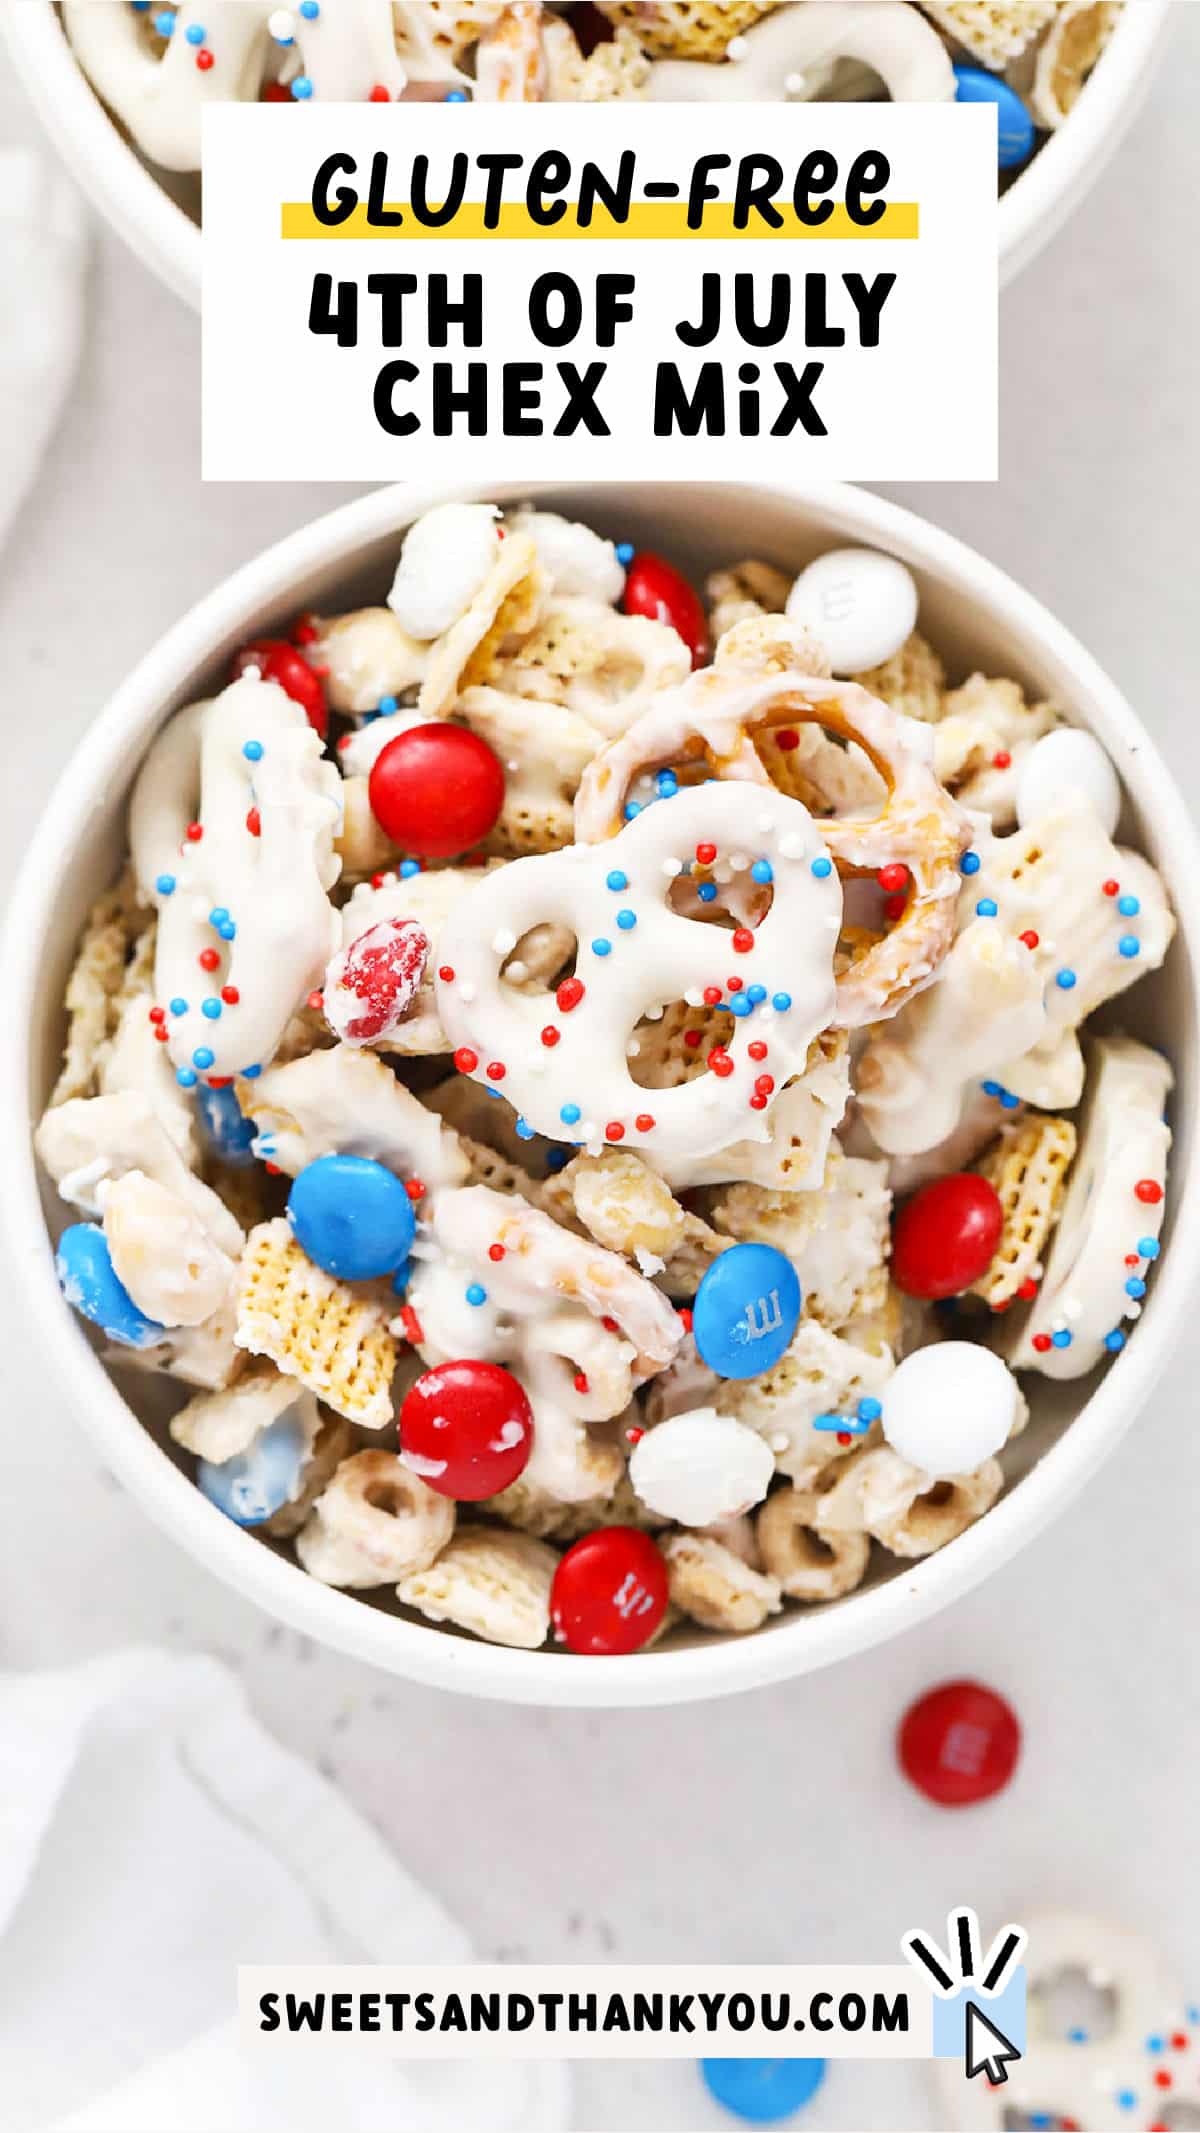 Crispy, crunchy Gluten-Free 4th of July Chex Mix is an easy red, white, and blue treat. You'll love this patriotic 4th of july snack mix, perfect for summer BBQs, game nights, movie nights, pool parties & more! You don't even have to turn on the oven to make this no bake dessert! Get the recipe and more summer dessert recipes to try at sweetsandthankyou.com